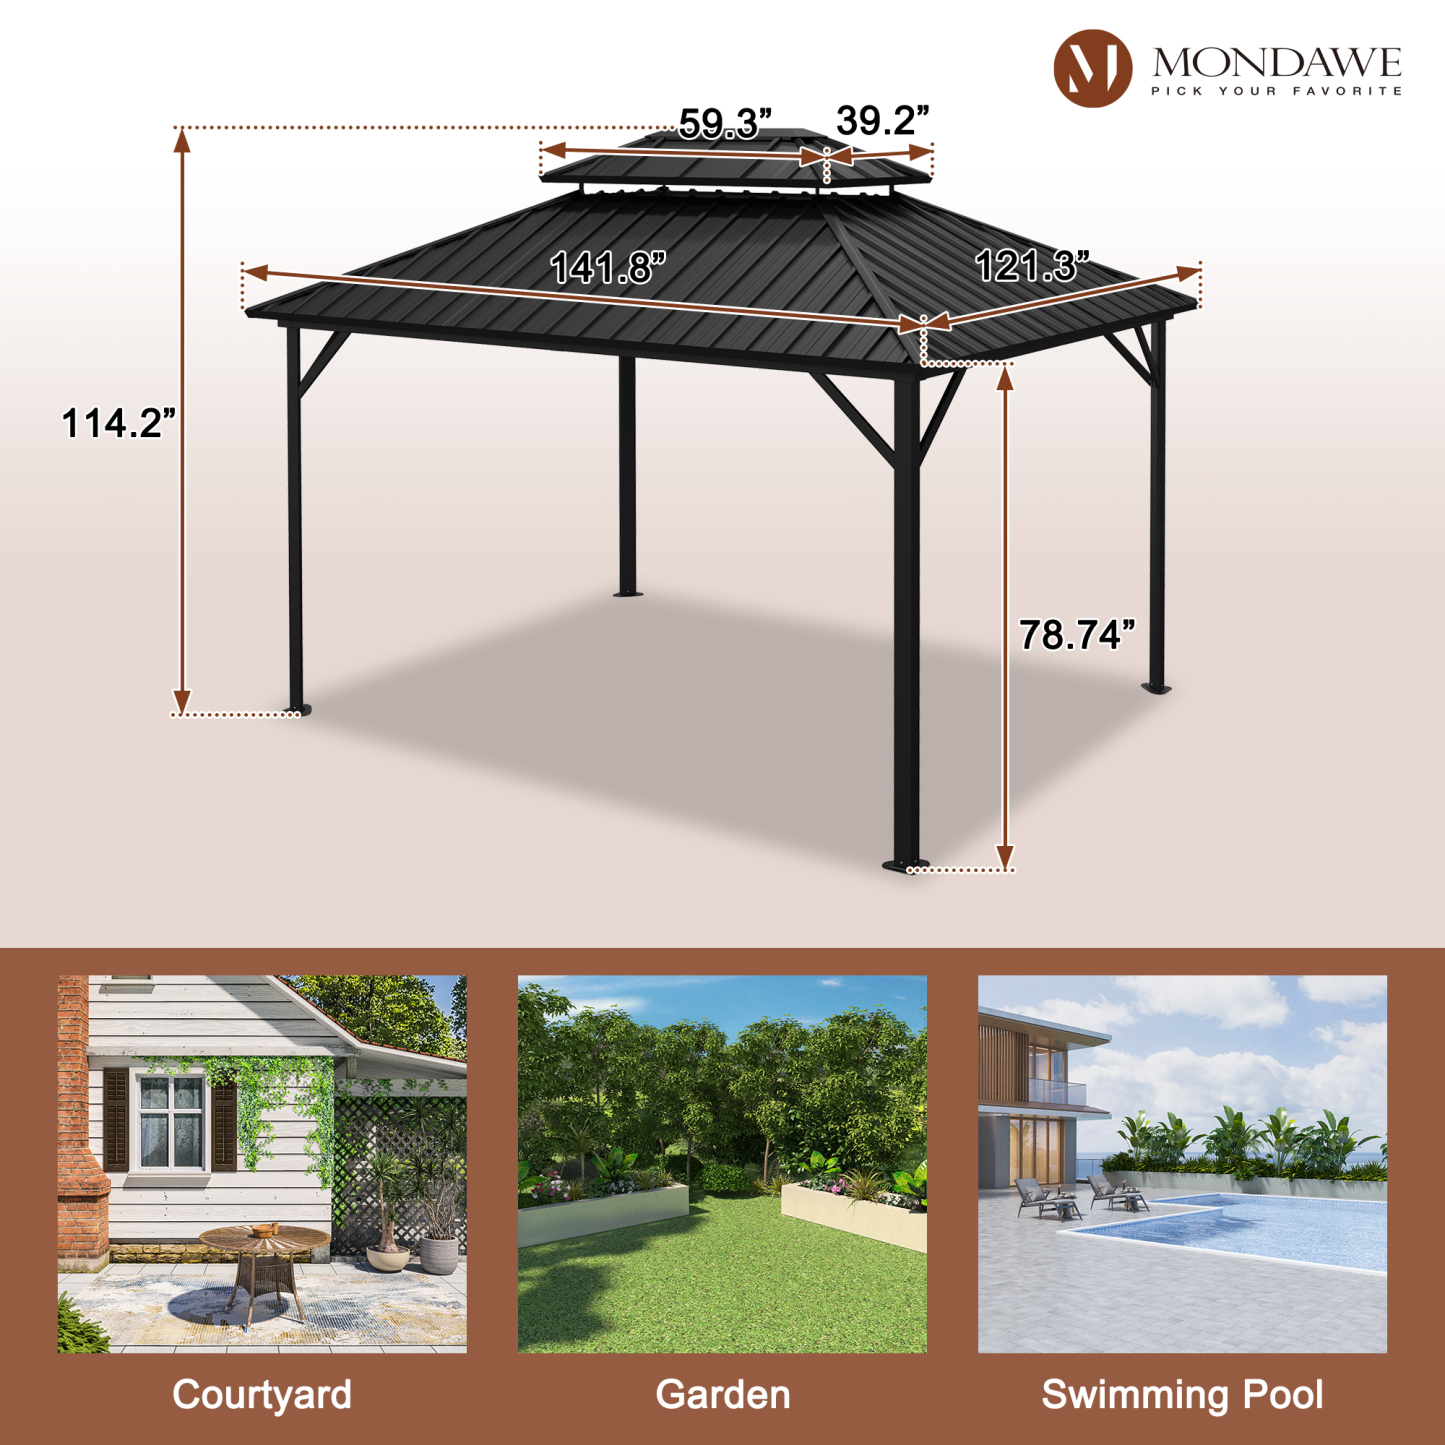 10 ft. x 12 ft. Outdoor Steel Frame Patio Gazebo Canopy Tent Shelter with Galvanized Steel Hardtop Roof Pavilion Garden-Mondawe